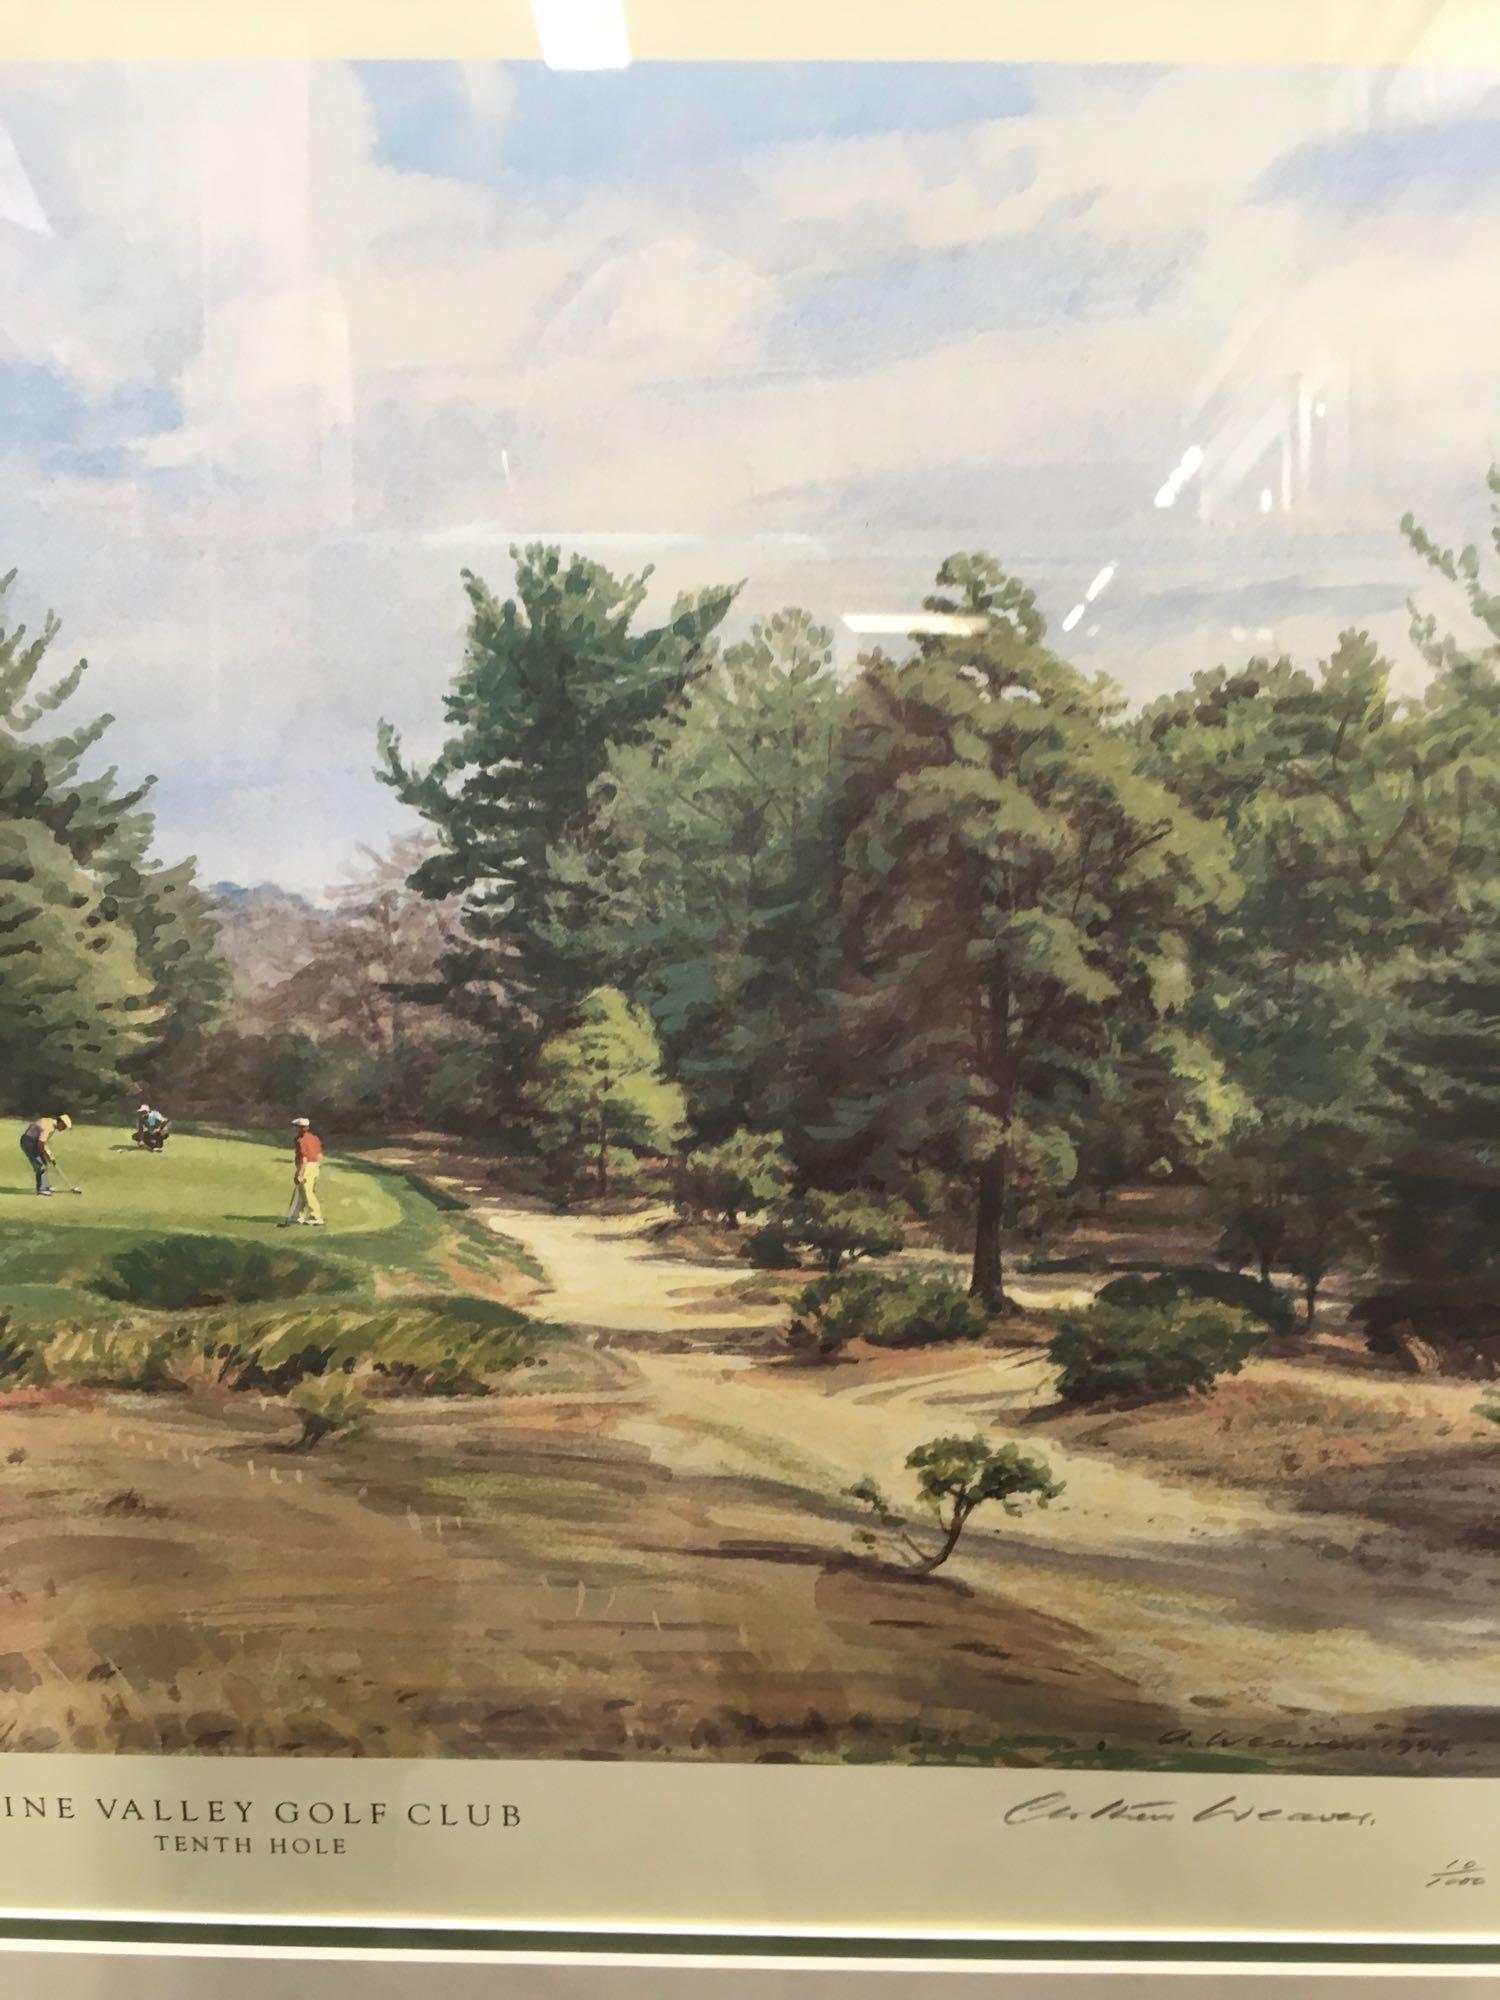 Print, Pine Valley Golf Club, Tenth Hole, by A. Weaver, 1994